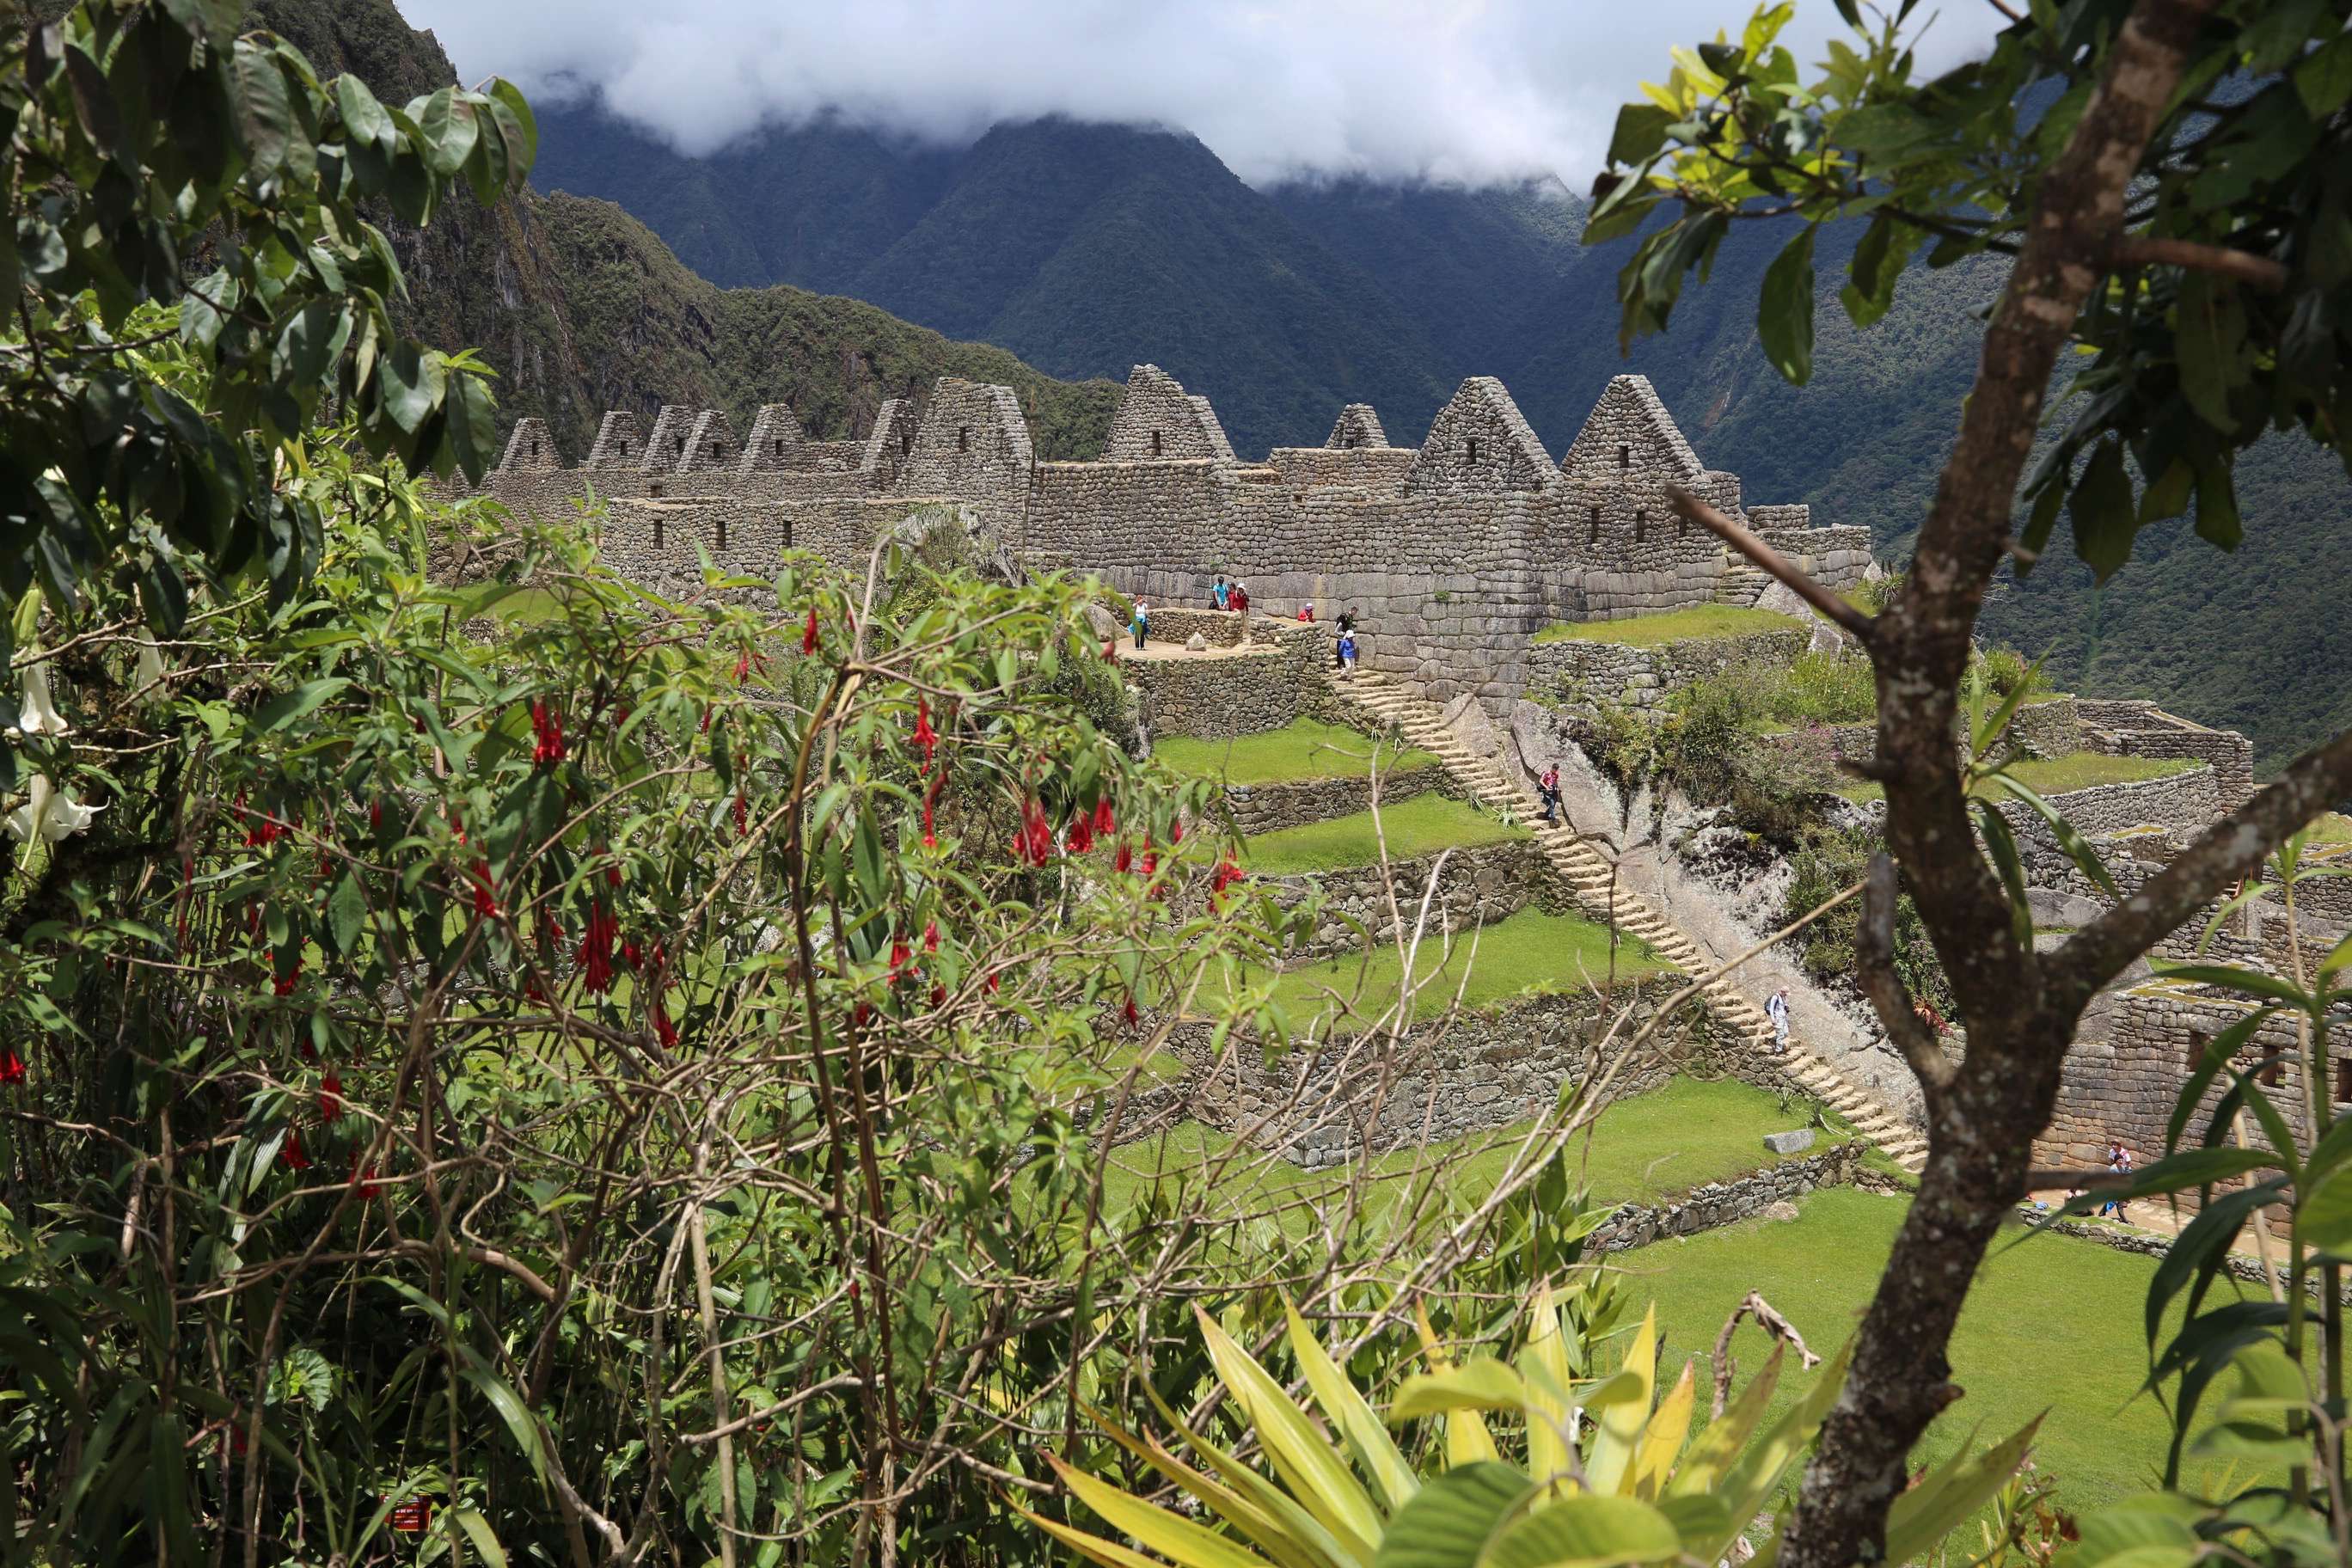 From a distance and with foliage in the foreground, Machu Picchu's harmony with Nature and its surroundings is readily apparent.